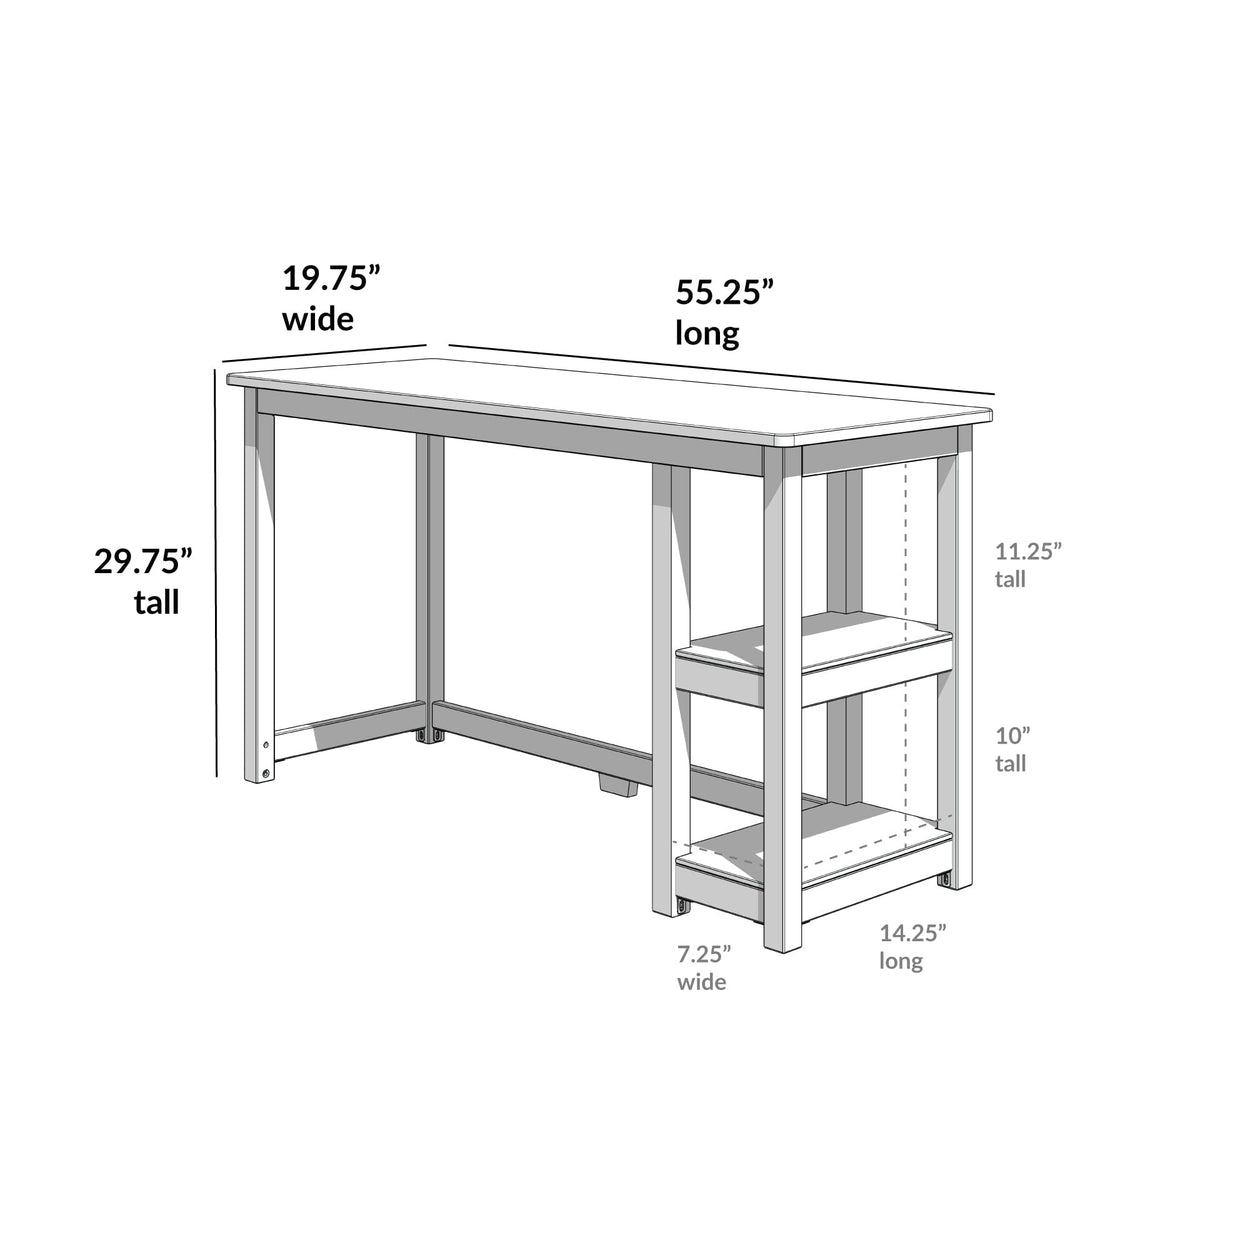 181405-002 : Furniture Desk with Bookshelves - 55 inches, White